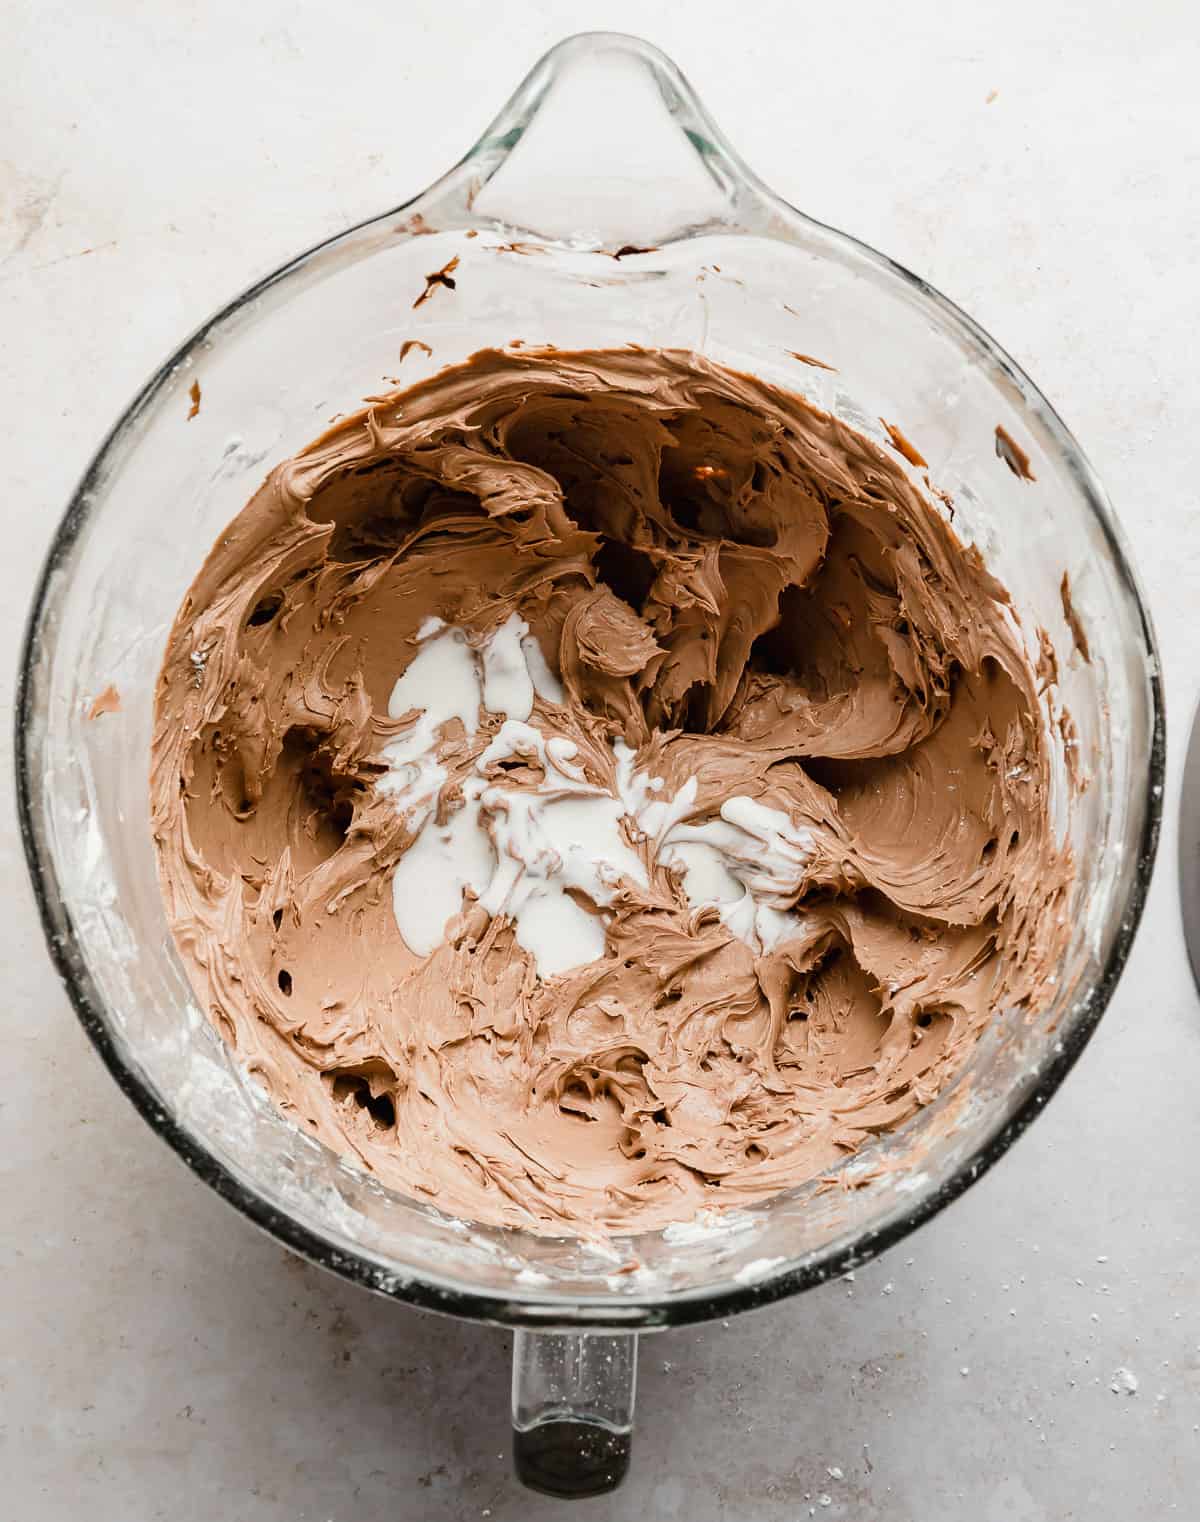 Heavy cream poured over top a light brown Chocolate Buttercream Frosting in a glass bowl.